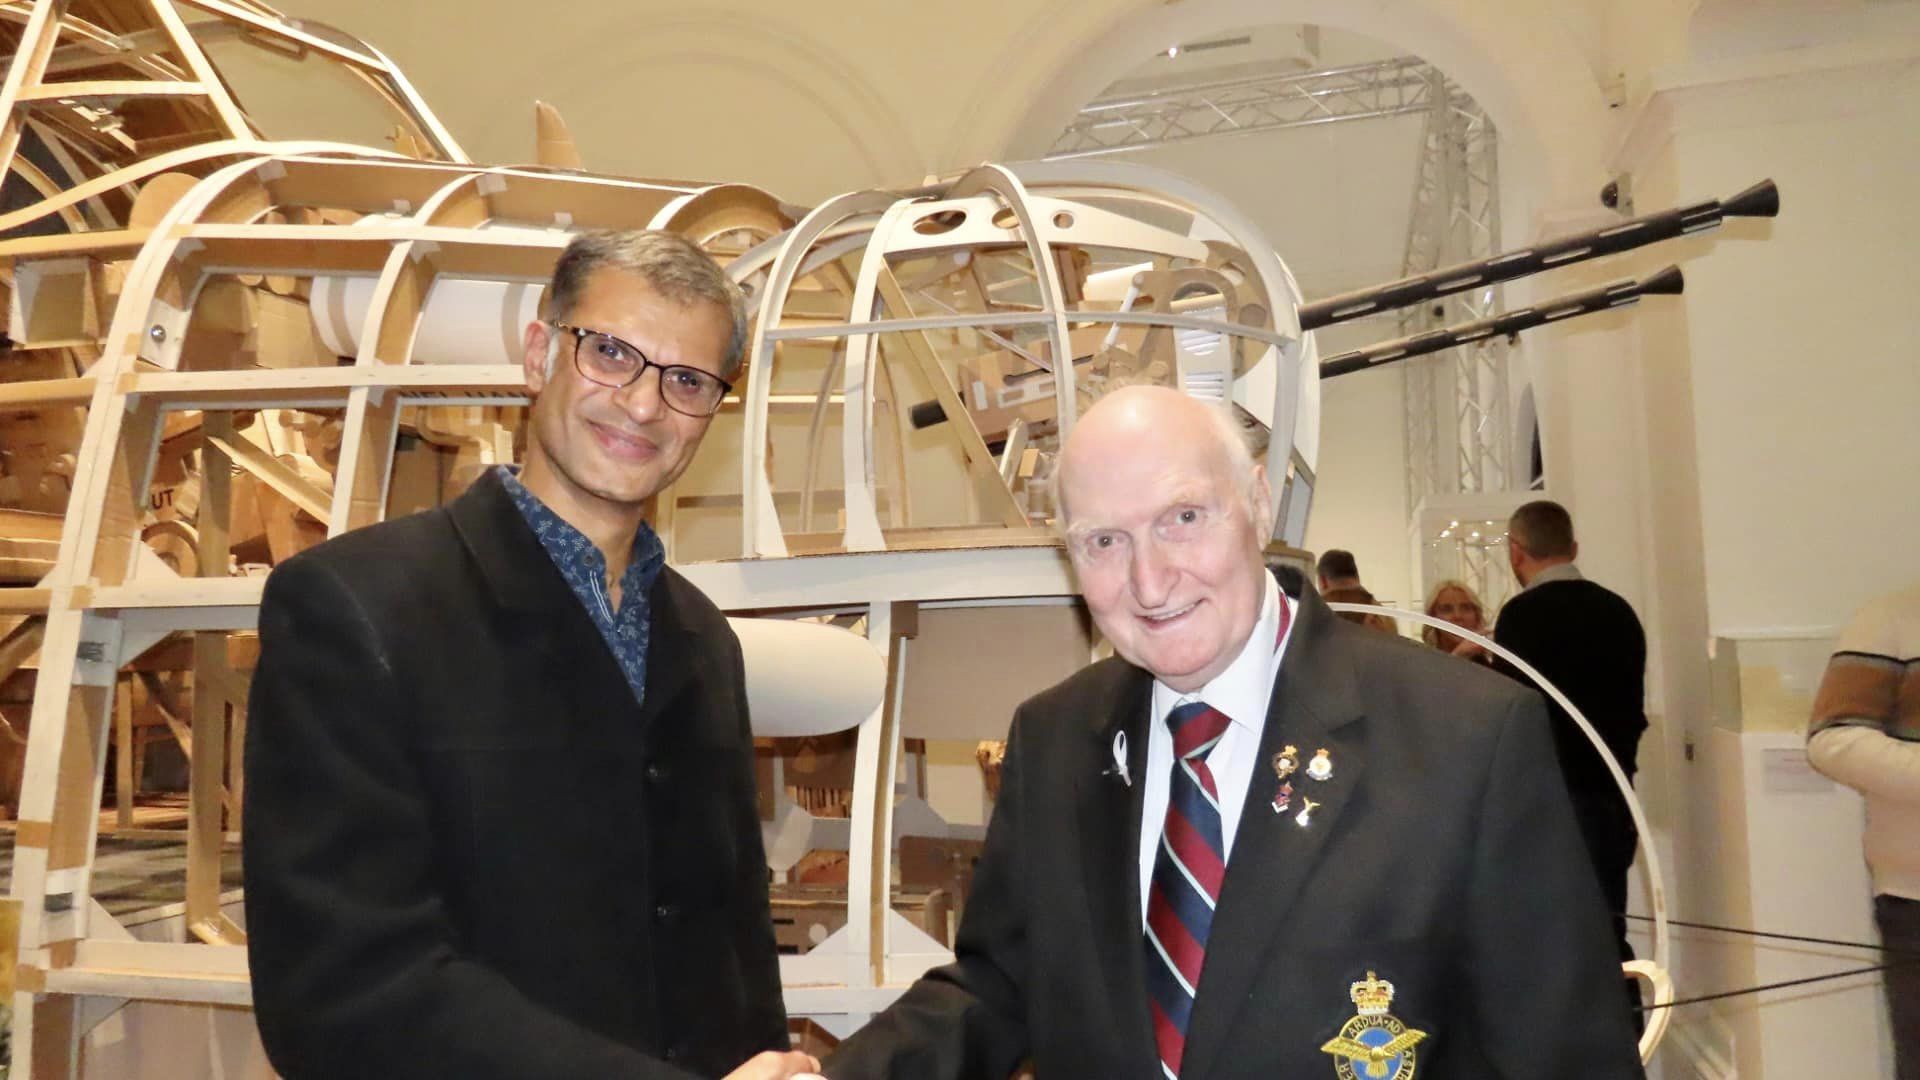 Guests enjoyed the launch night of the new The Many / Paper My Wishes exhibition by artist Suhail Shaikh at the Atkinson in Southport. Suhail Shaikh and RAFA Chairman David McGregor. 